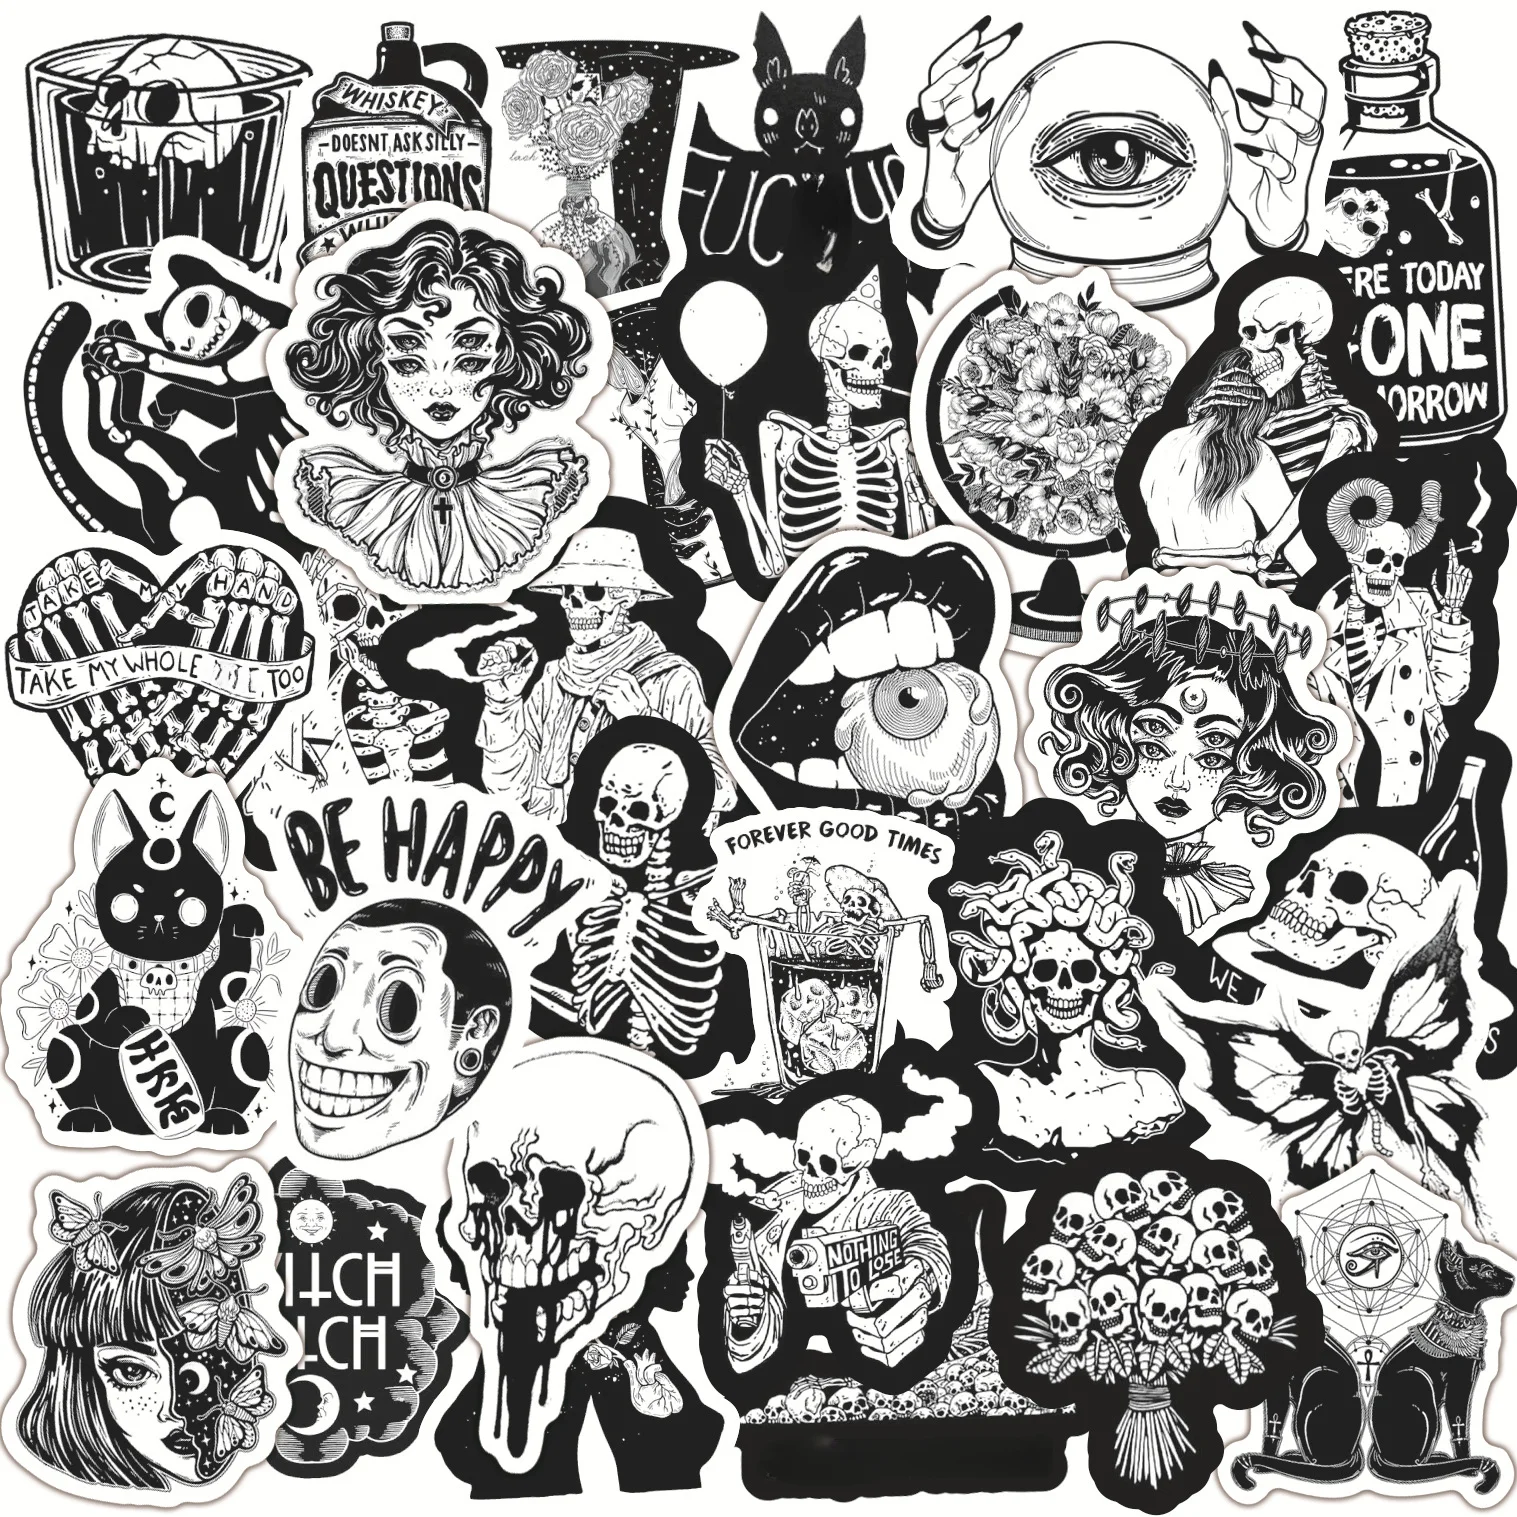 100PCS Mixed Black White Gothic Stickers Graffiti Motorcycle Skateboard Travel Phone Case Decal Toys Sticker Waterproof blank black paper cards a4 a3 8k 4k graffiti diy paper cardboard 80g 180g 300g drawing paper sketch aquarelle papier sketchbook